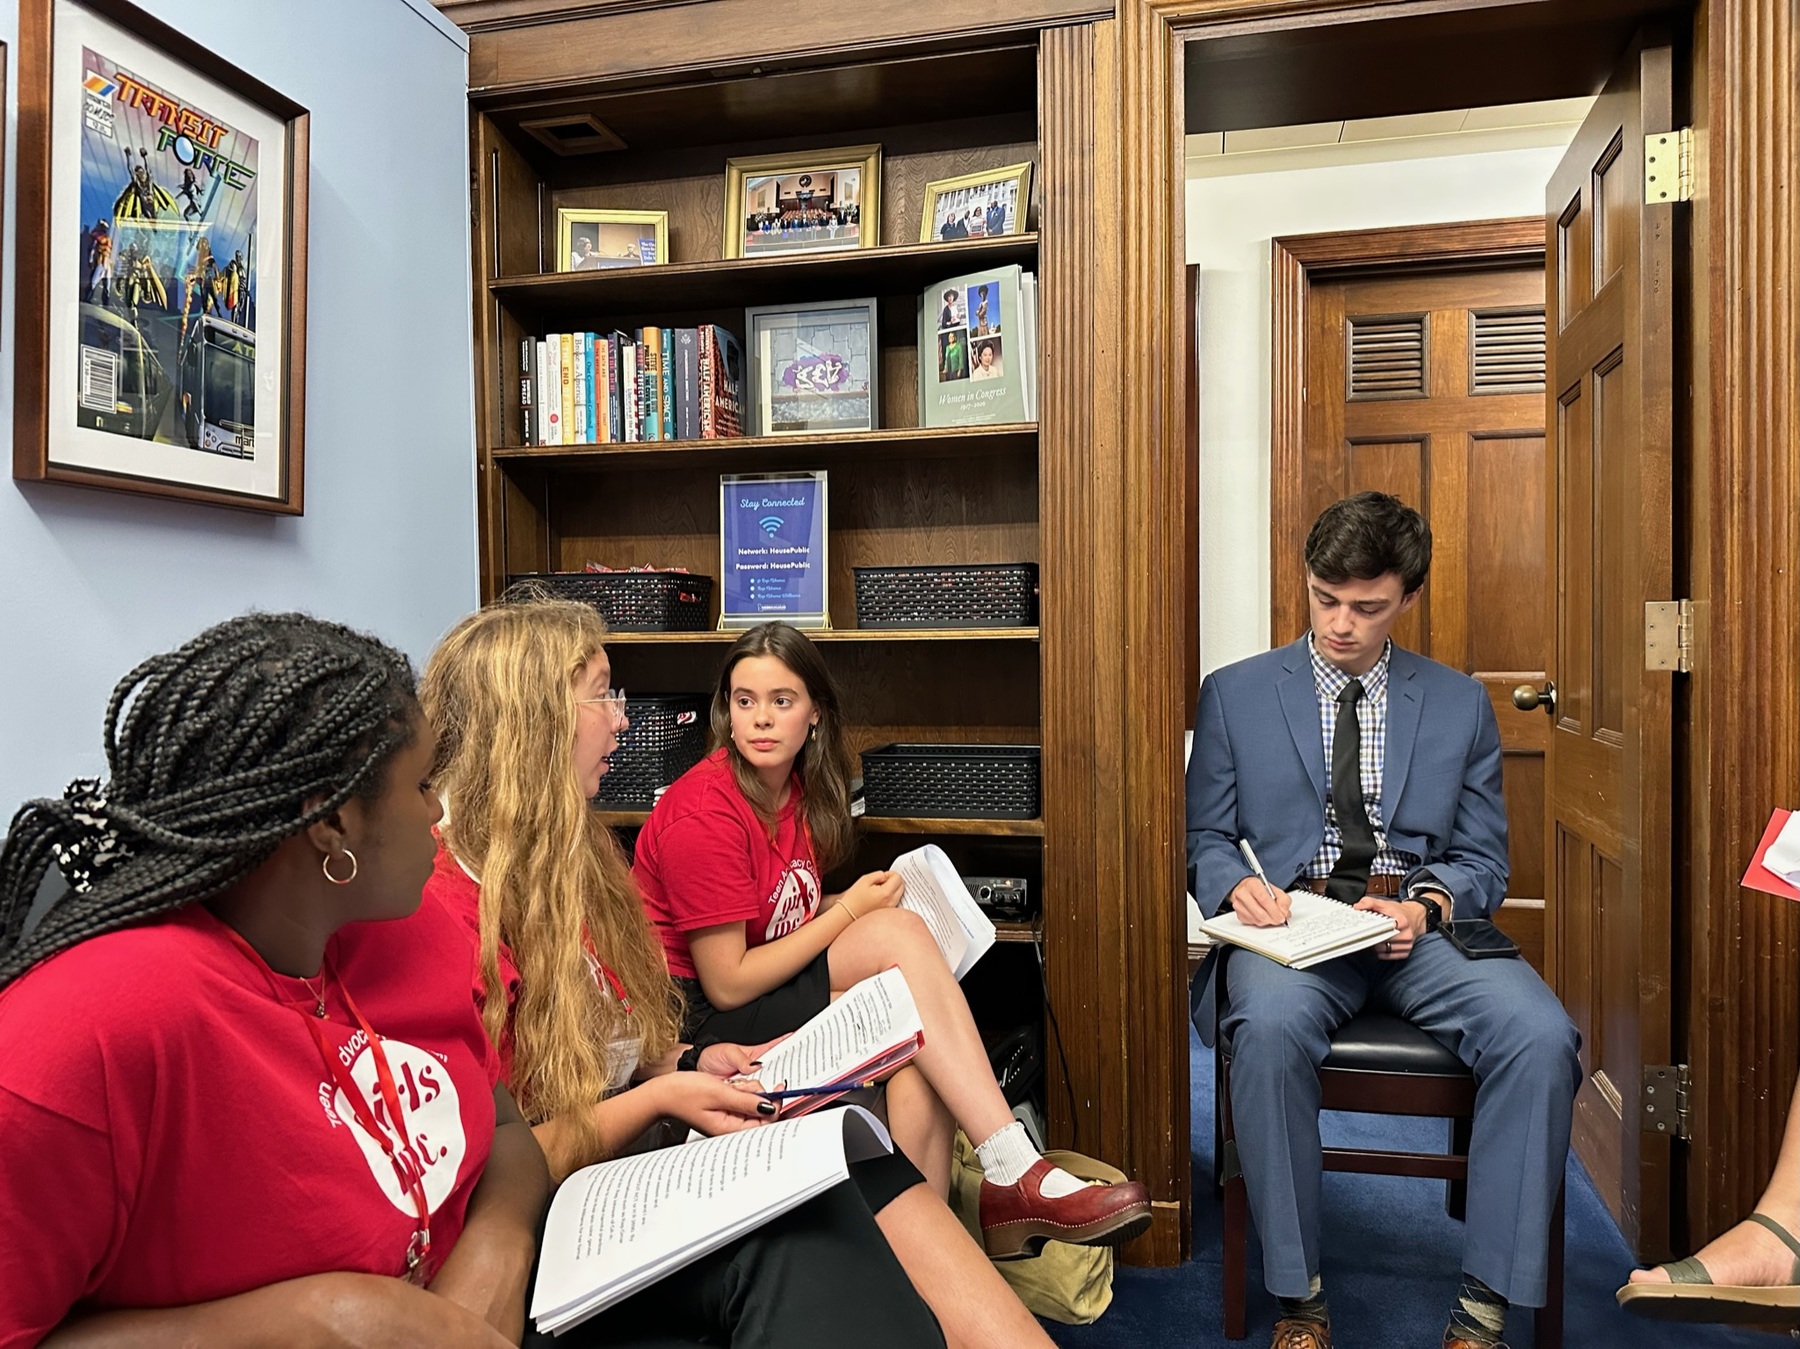 Members of the Teen Advocacy Council of Girls Inc. sit in a room in Washington, D.C.